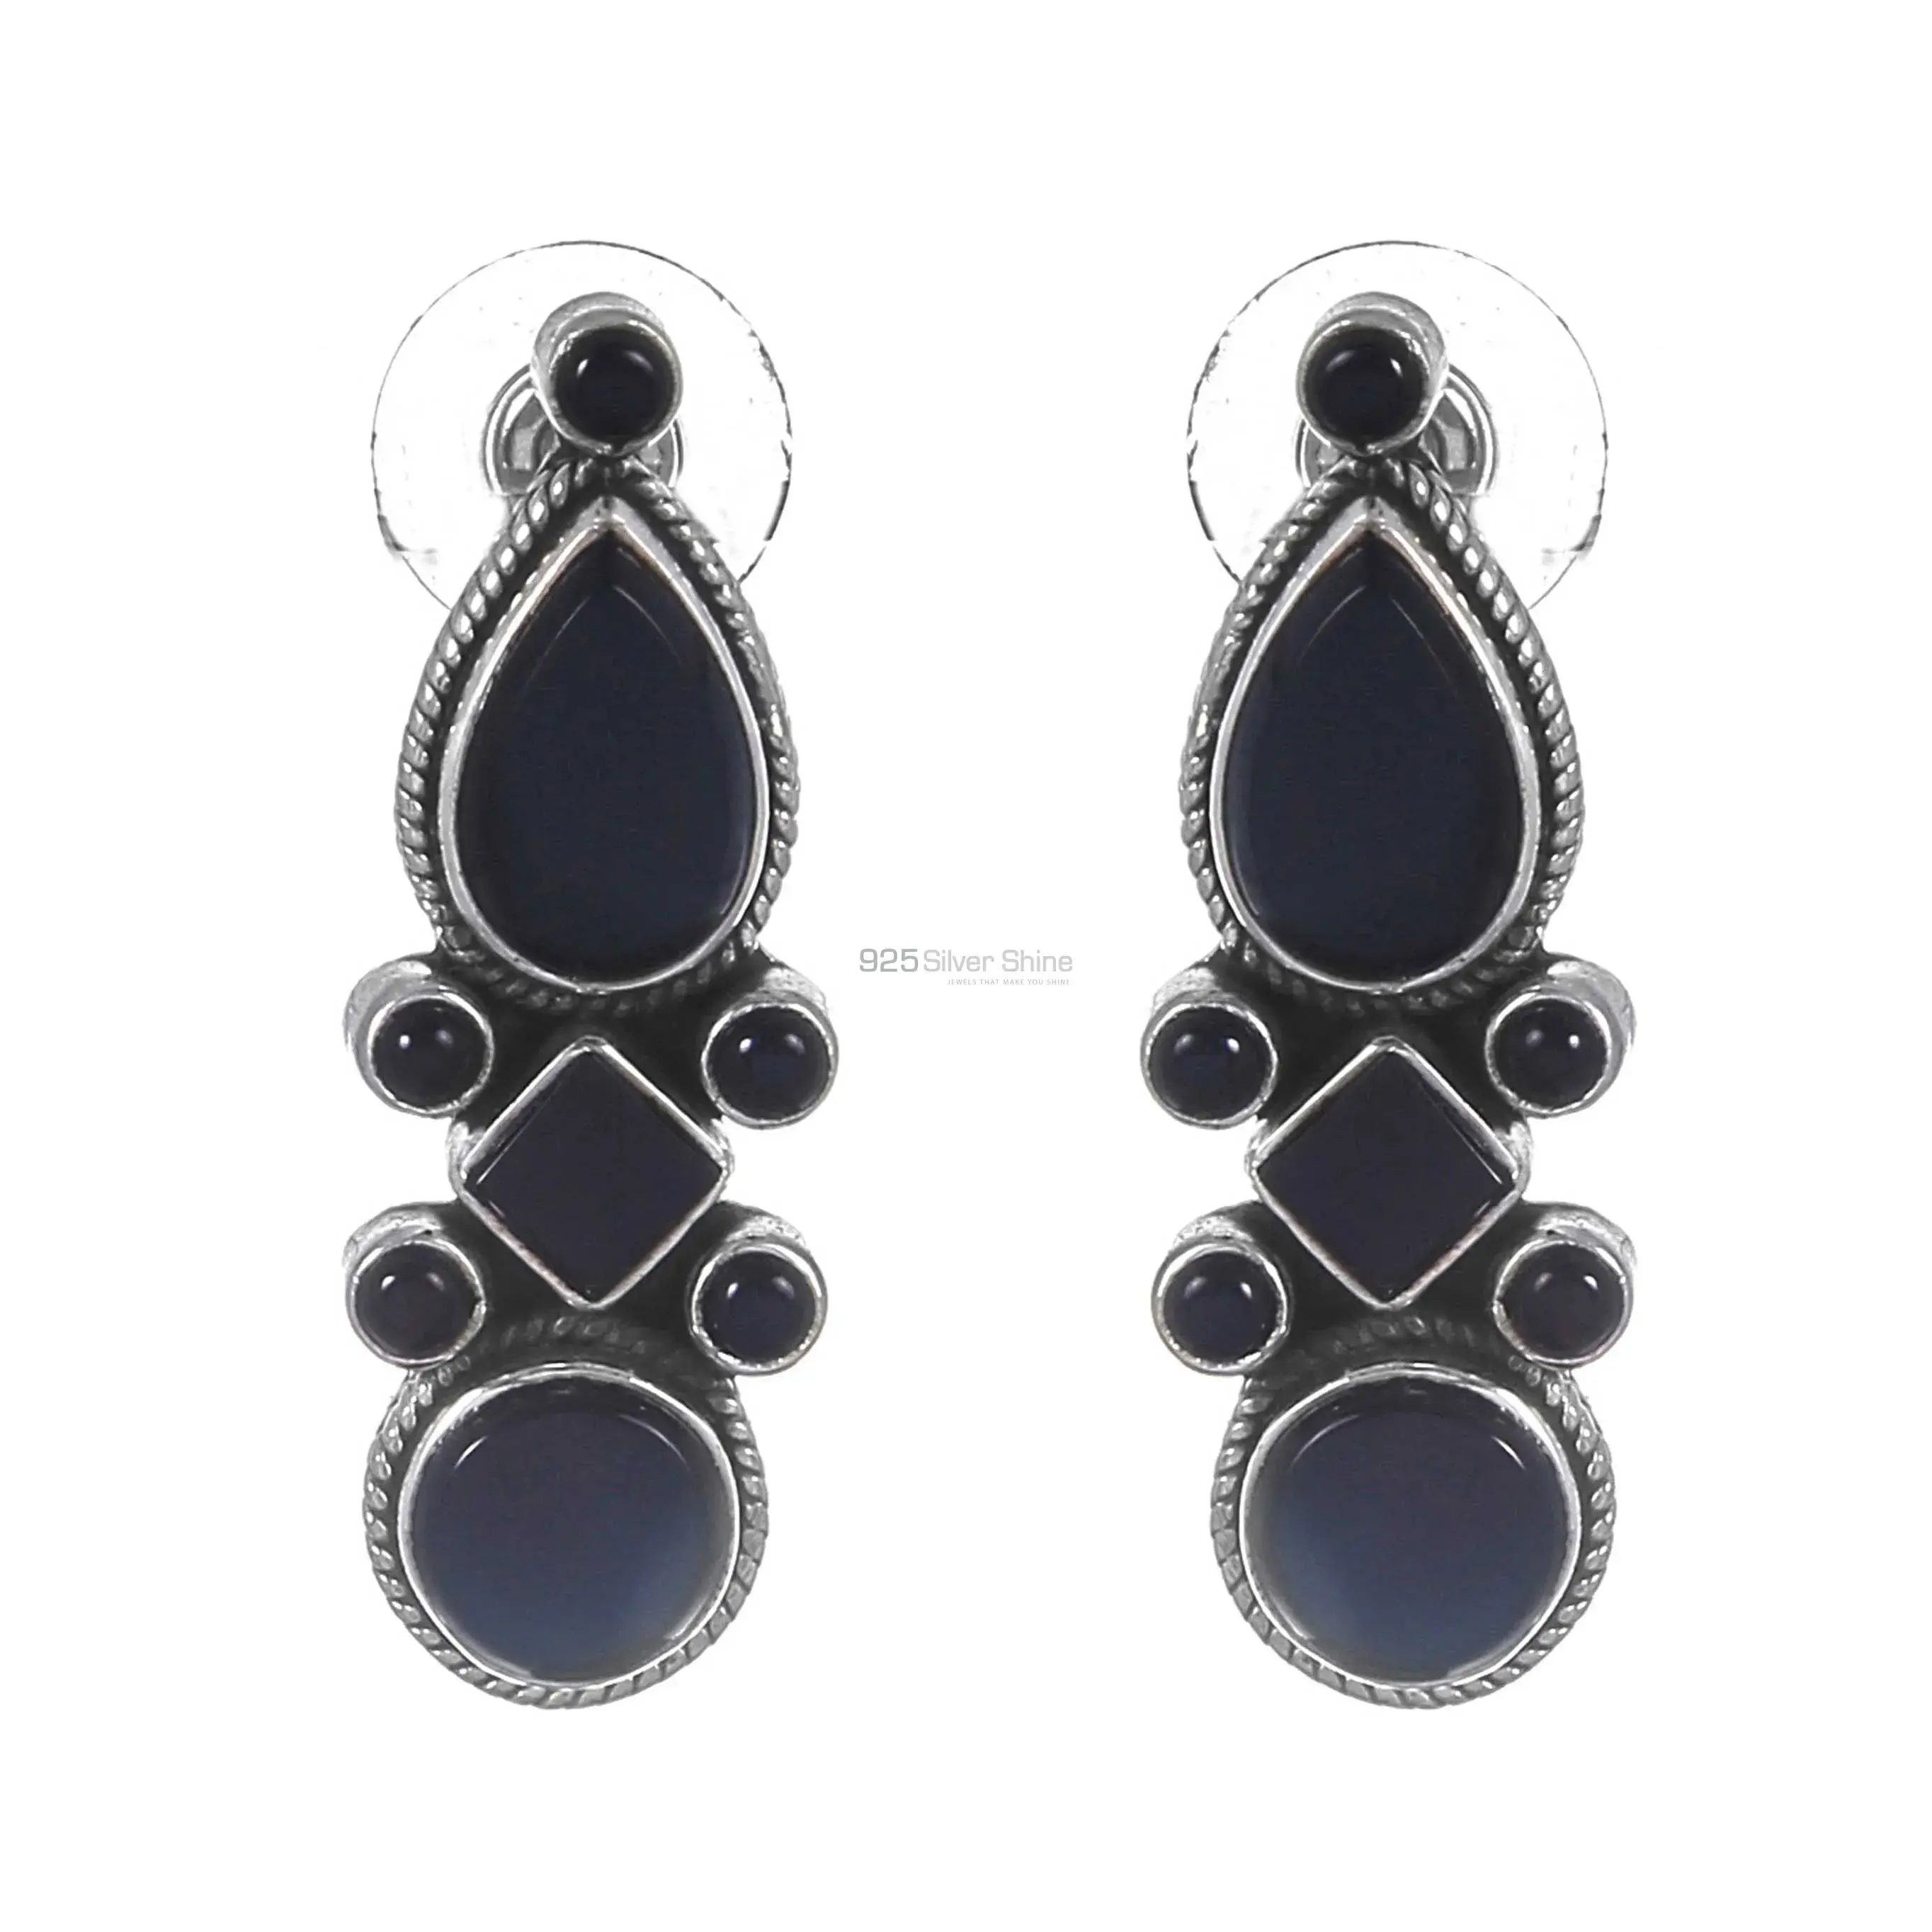 Affordable 925 Sterling Silver Handmade Earrings Manufacturer In Lapis Gemstone Jewelry 925SE282